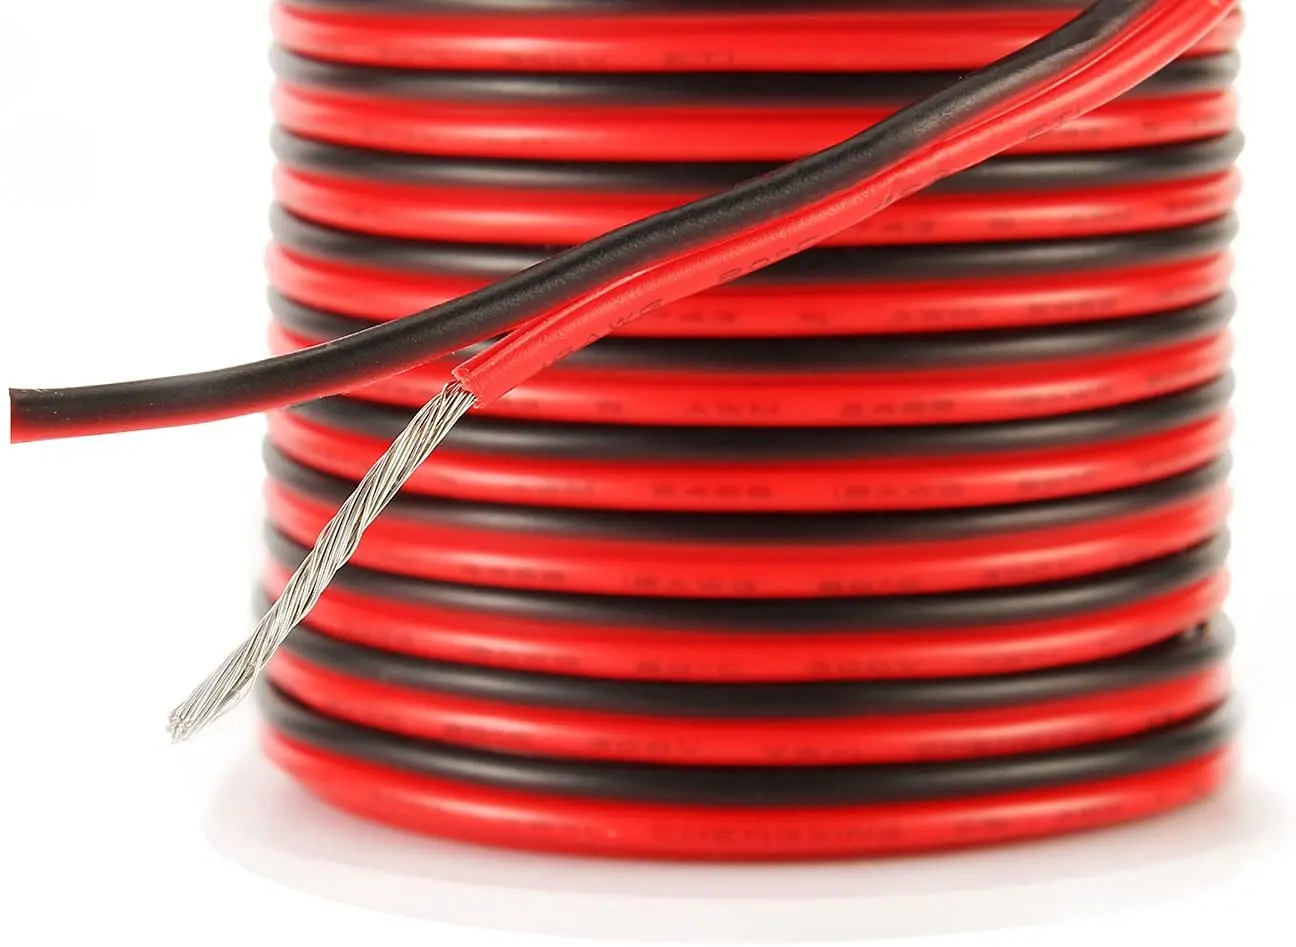 5M 22AWG Red Black Dual Core Electric Cable Wire for Car Auto Speaker H5J5 